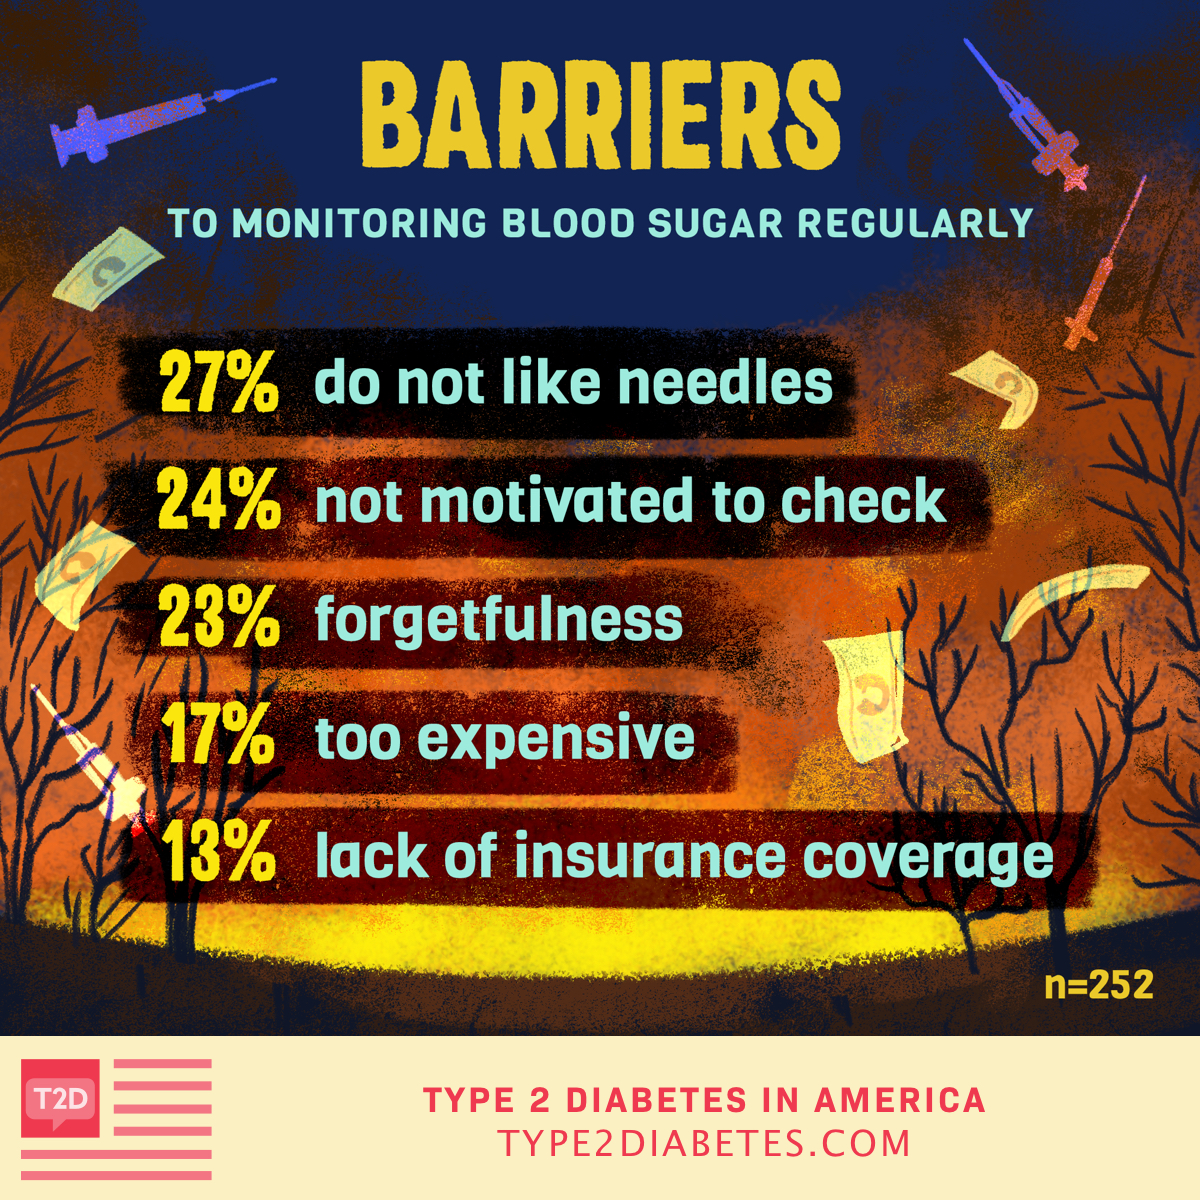 There are many barriers to checking blood sugar regularly including forgetfulness, cost, and fear of needles.